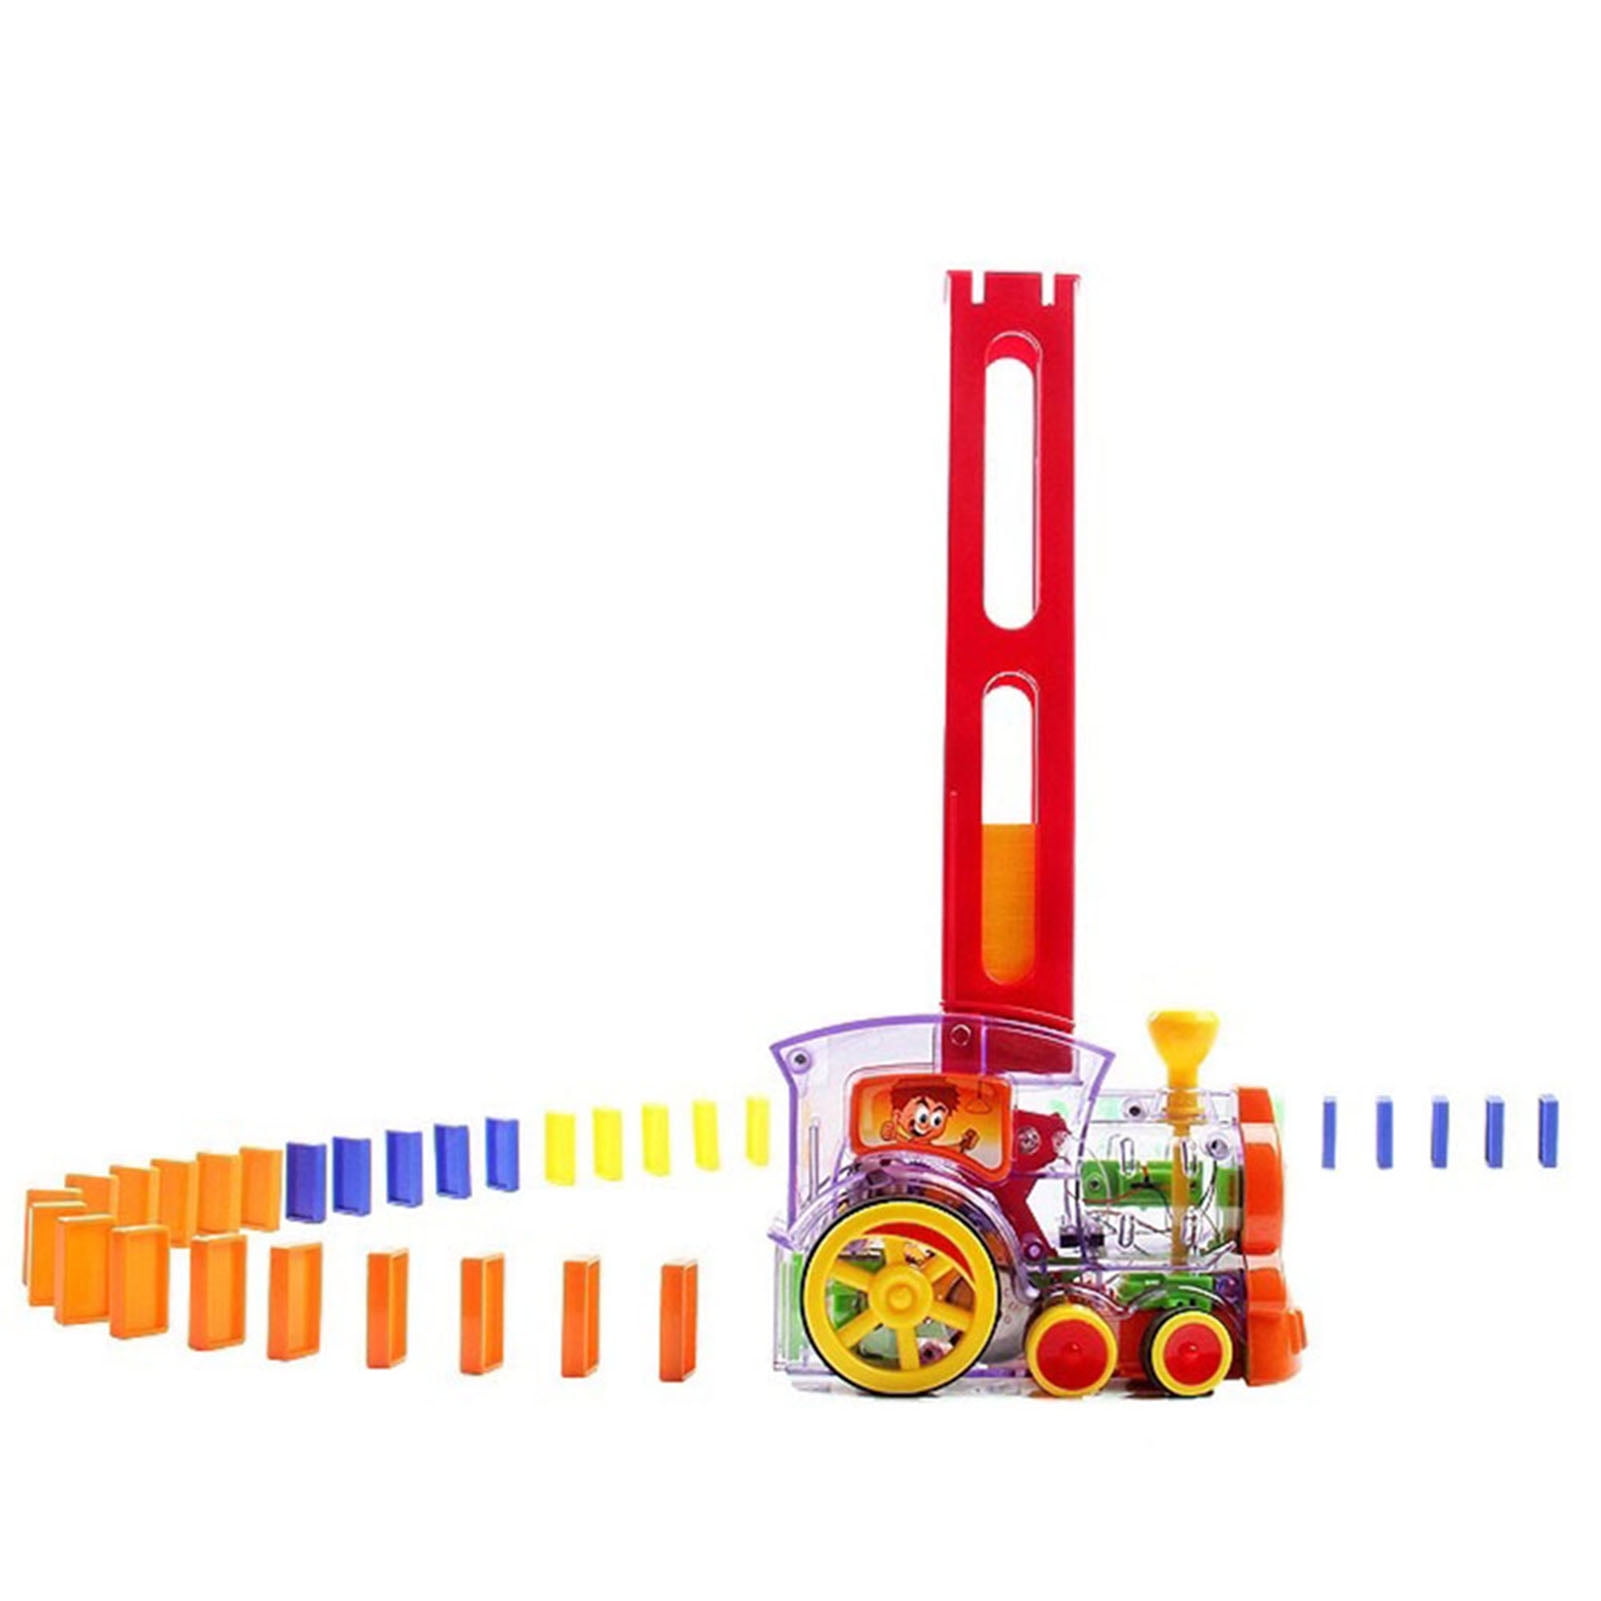 Gecheer Electric Domino Train Toy Set with 60Pcs Colorful Dominoes Game  Building Blocks Educational Boys Girls Children's Toys Gif - Walmart.com